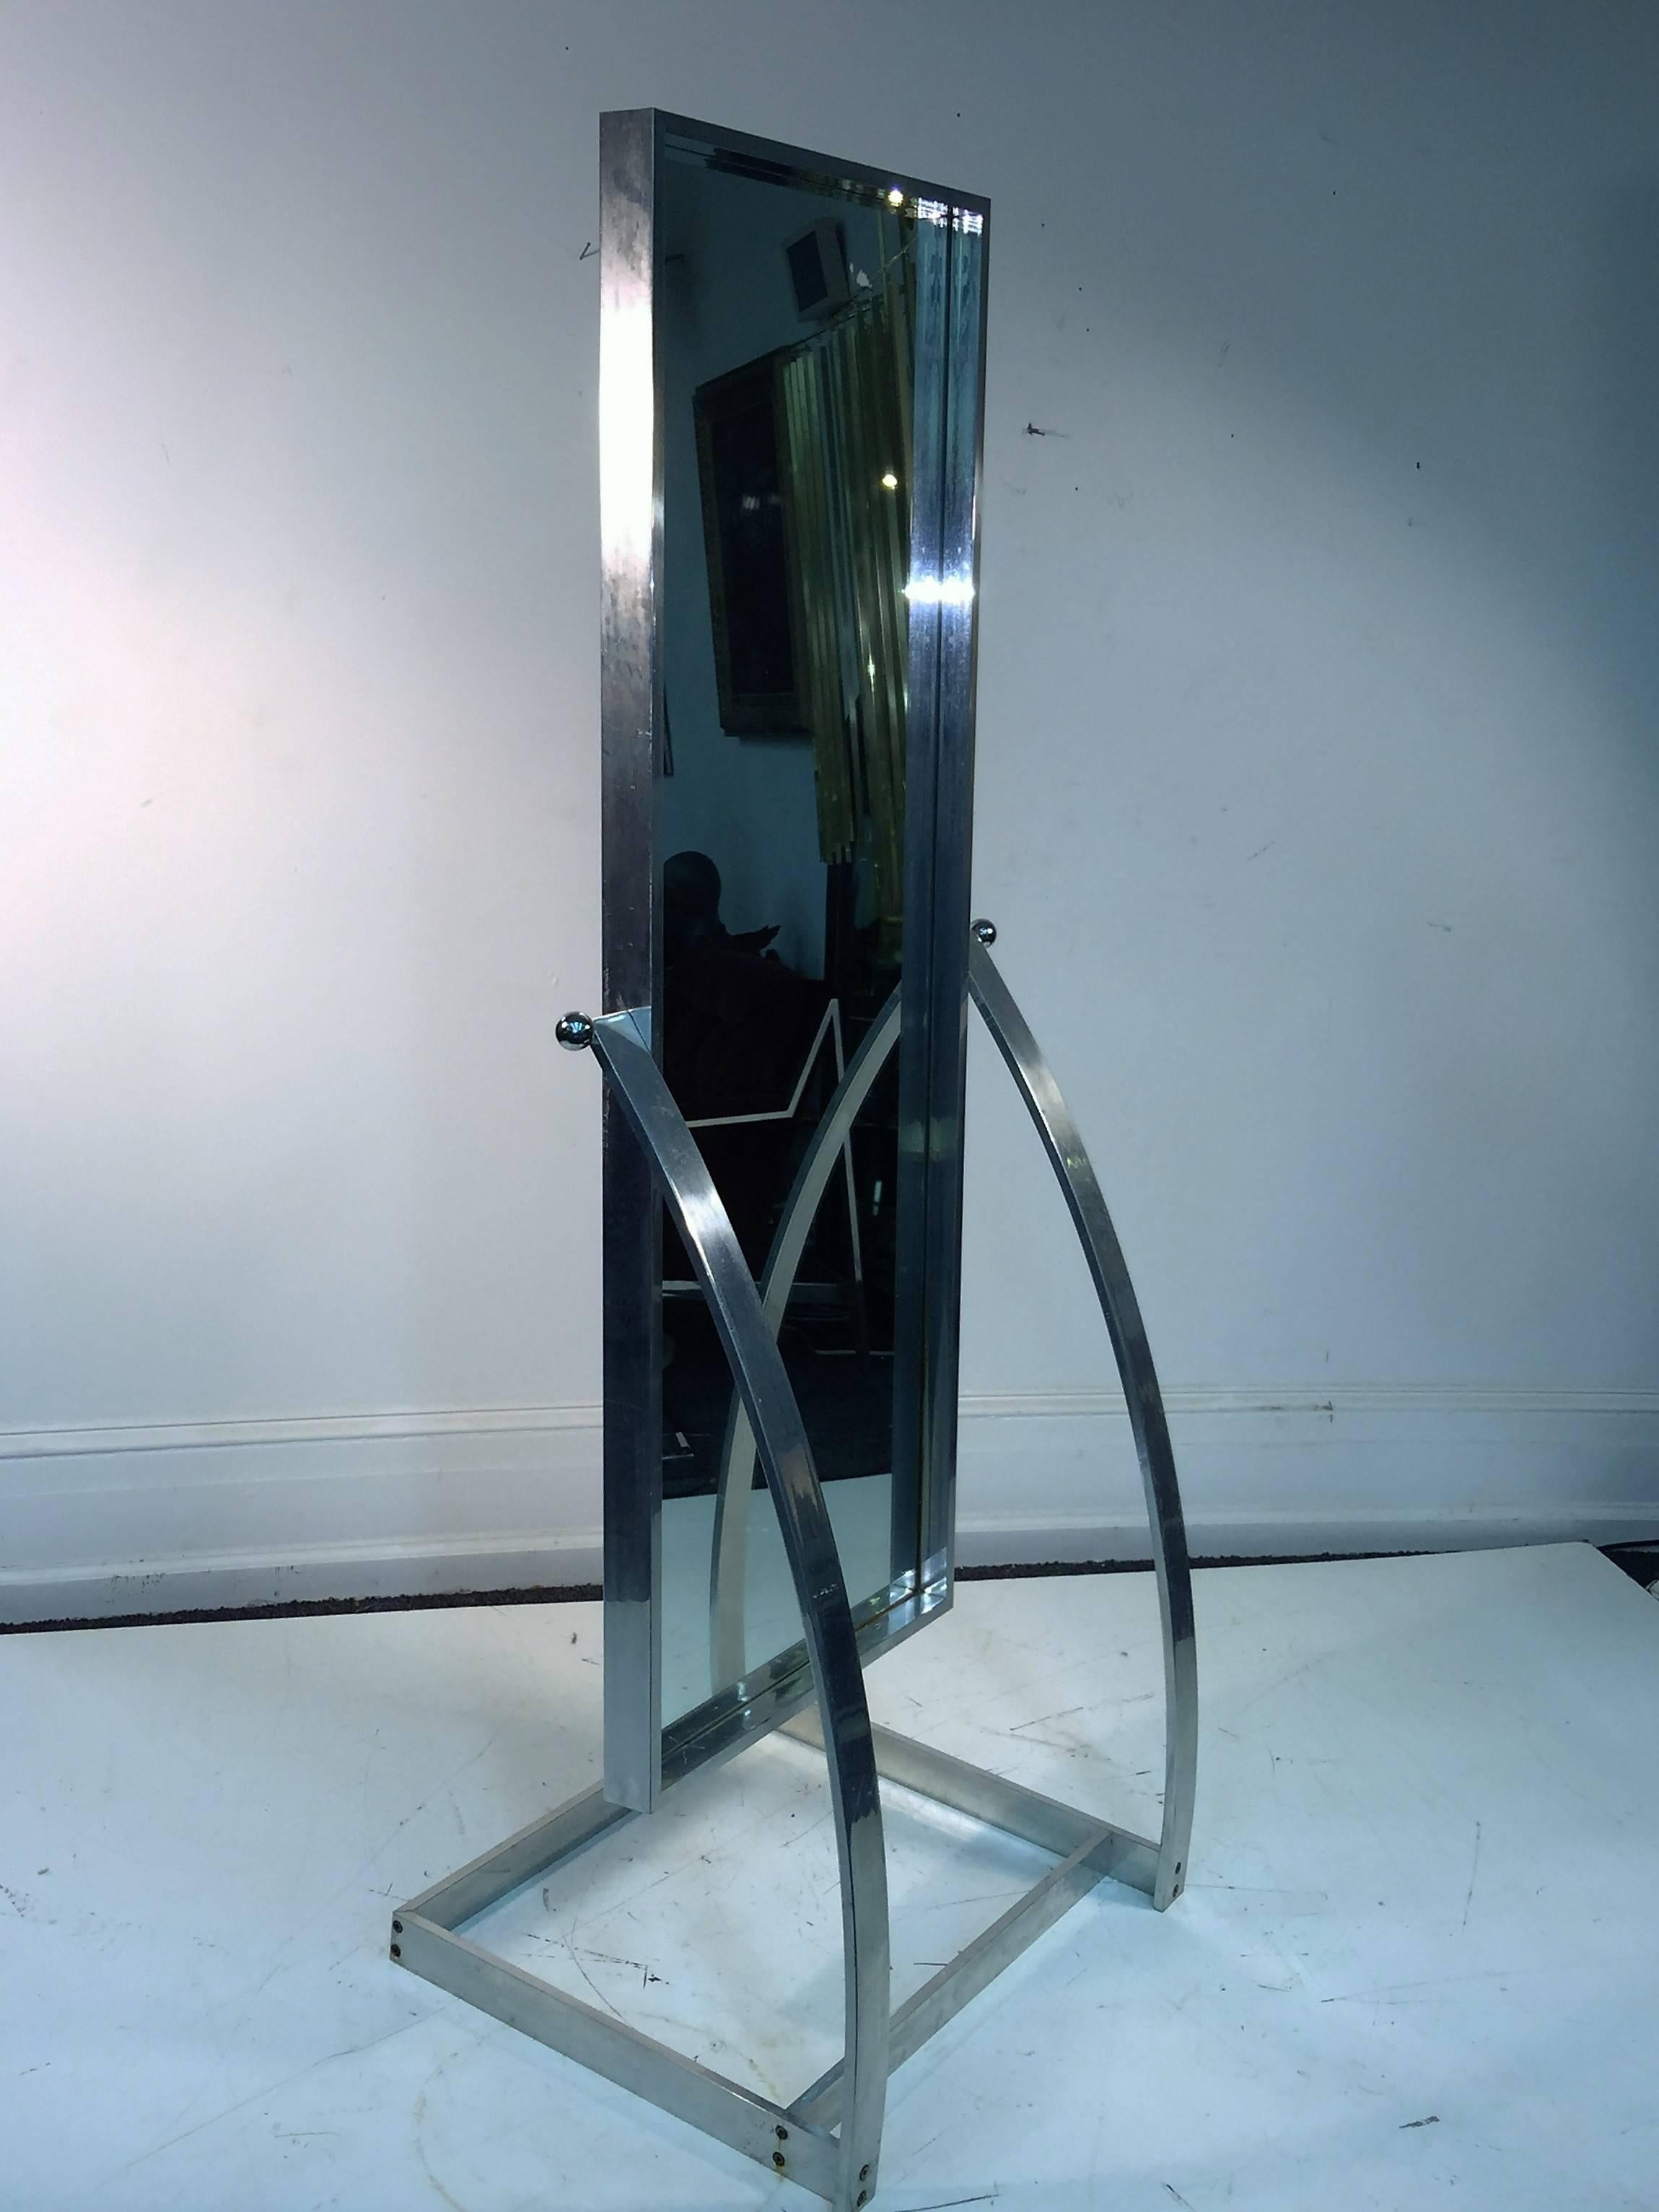 Great design aluminum frame with chromed ball accents full length adjustable angle mirror. Versatile mirror that can be used on either side of the angular design base. Designed by modern designer Milo Baughman in the 1970s. This is a great mirror